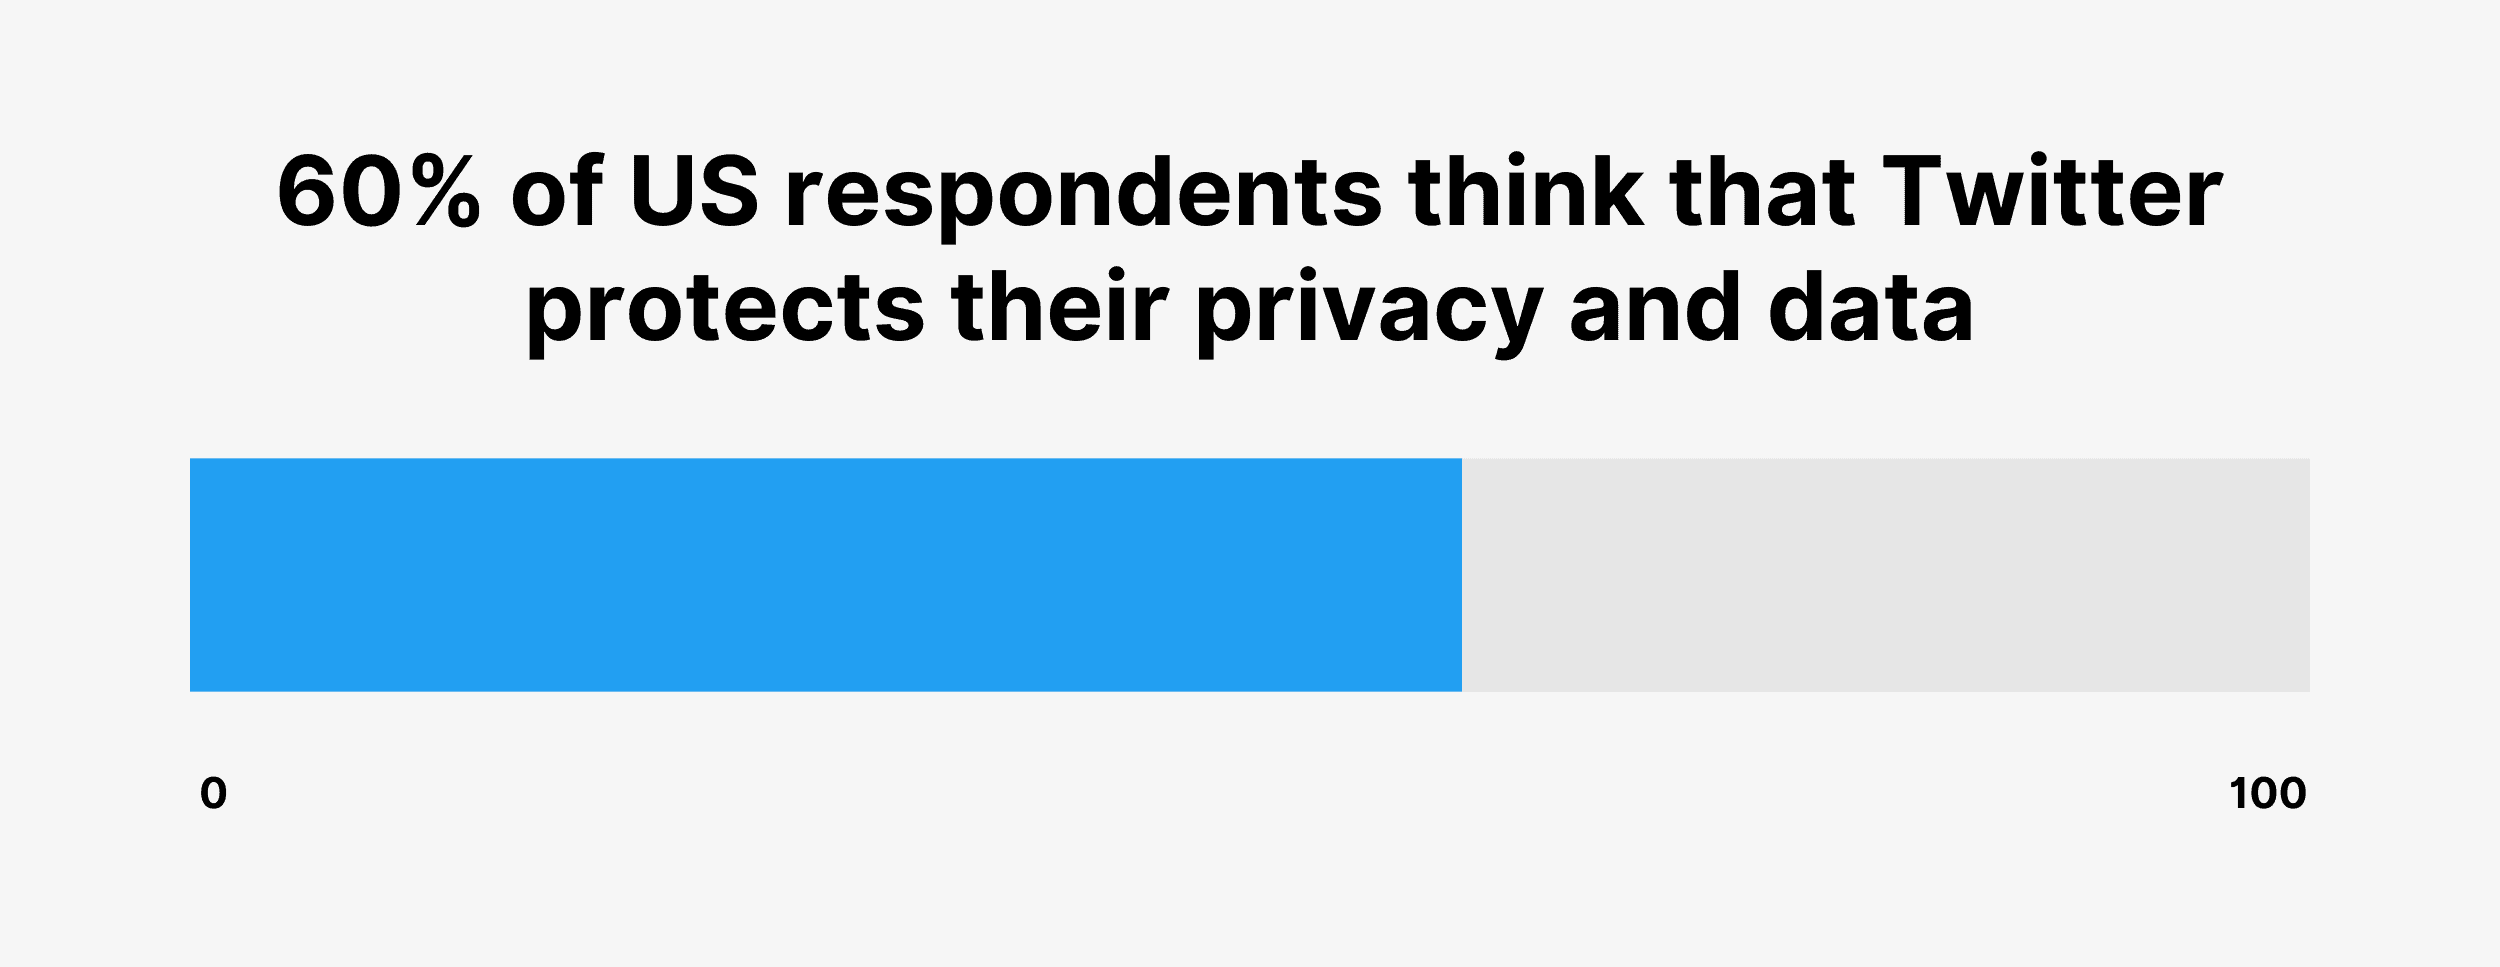 60% of US respondents think that Twitter protects their privacy and data